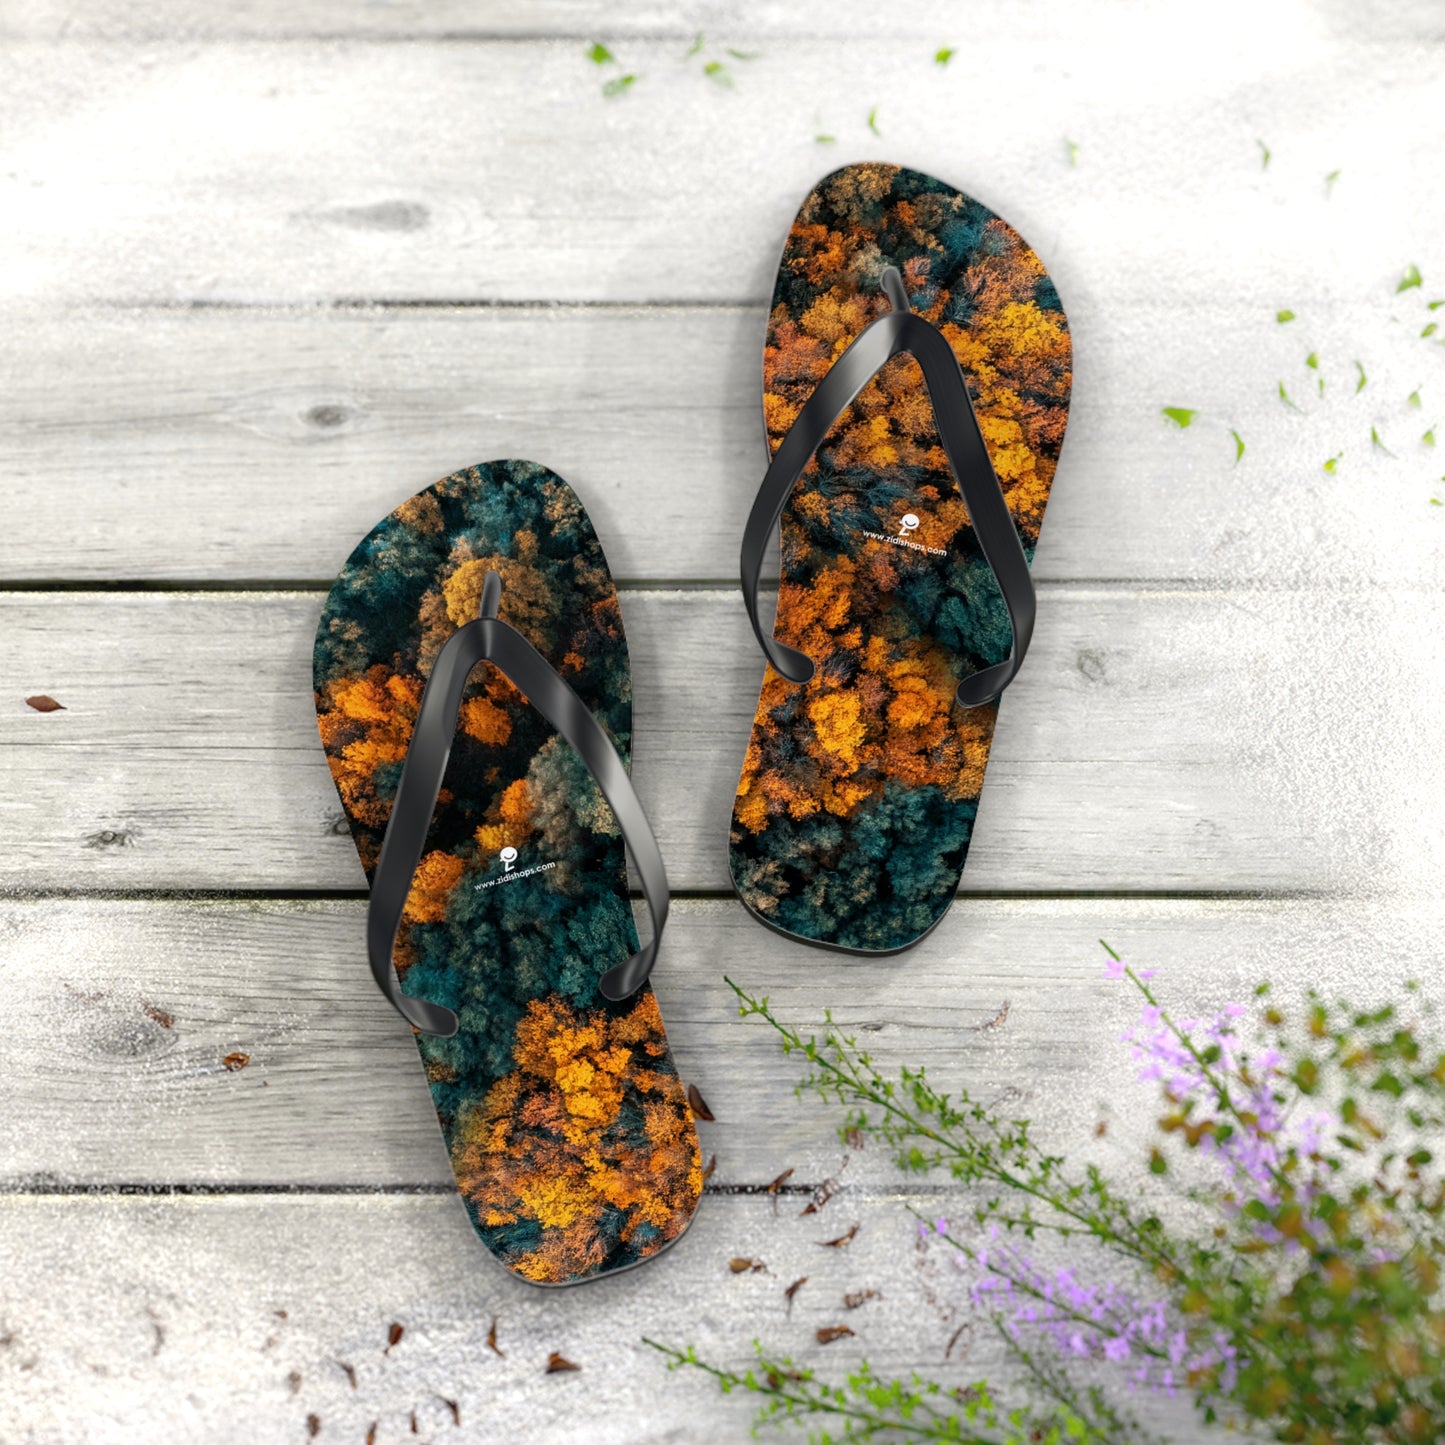 Flip Flops All-day comfort, Slippers, colorful, With an easy slip-on design, a cushioned footbed. Mixed colors